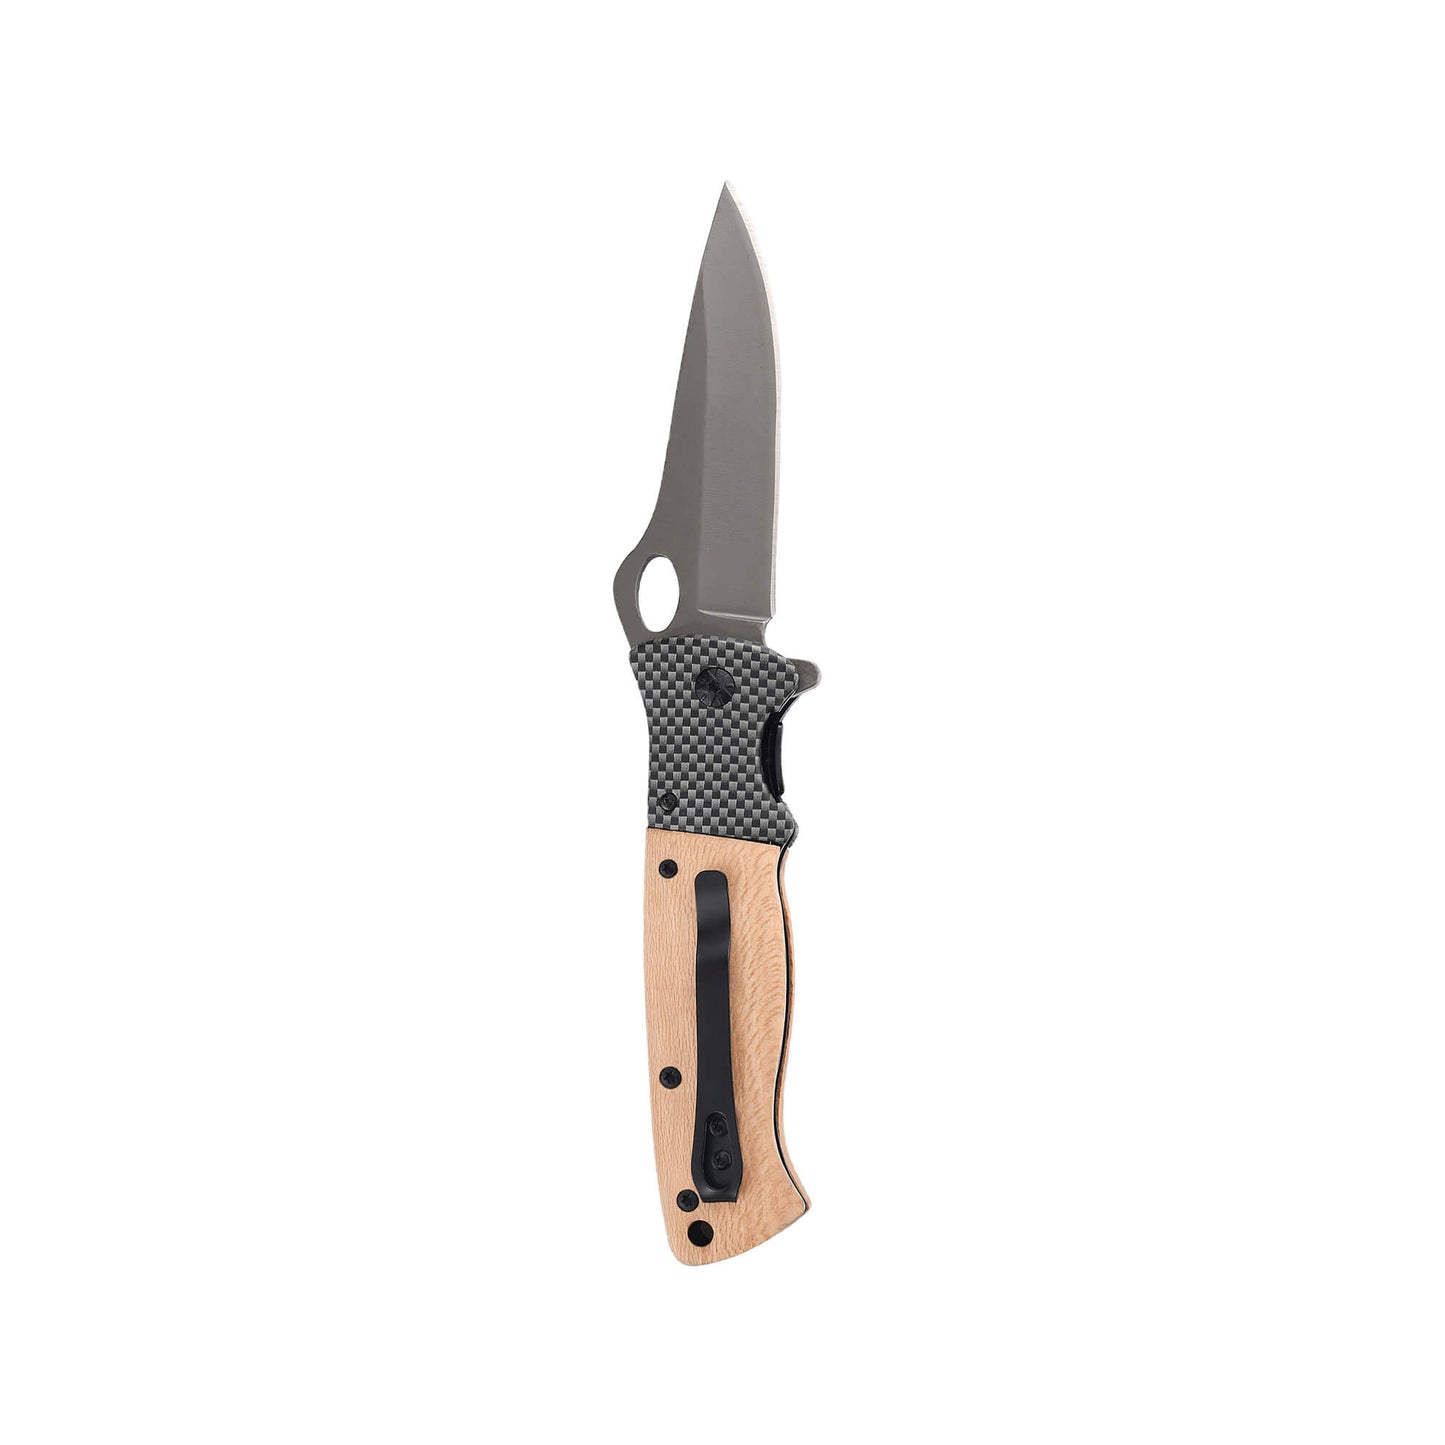 Folding knife Slacker from Mavik Gear with 440C gray steel drop point blade, wood handle, lanyard hole and hip clip.